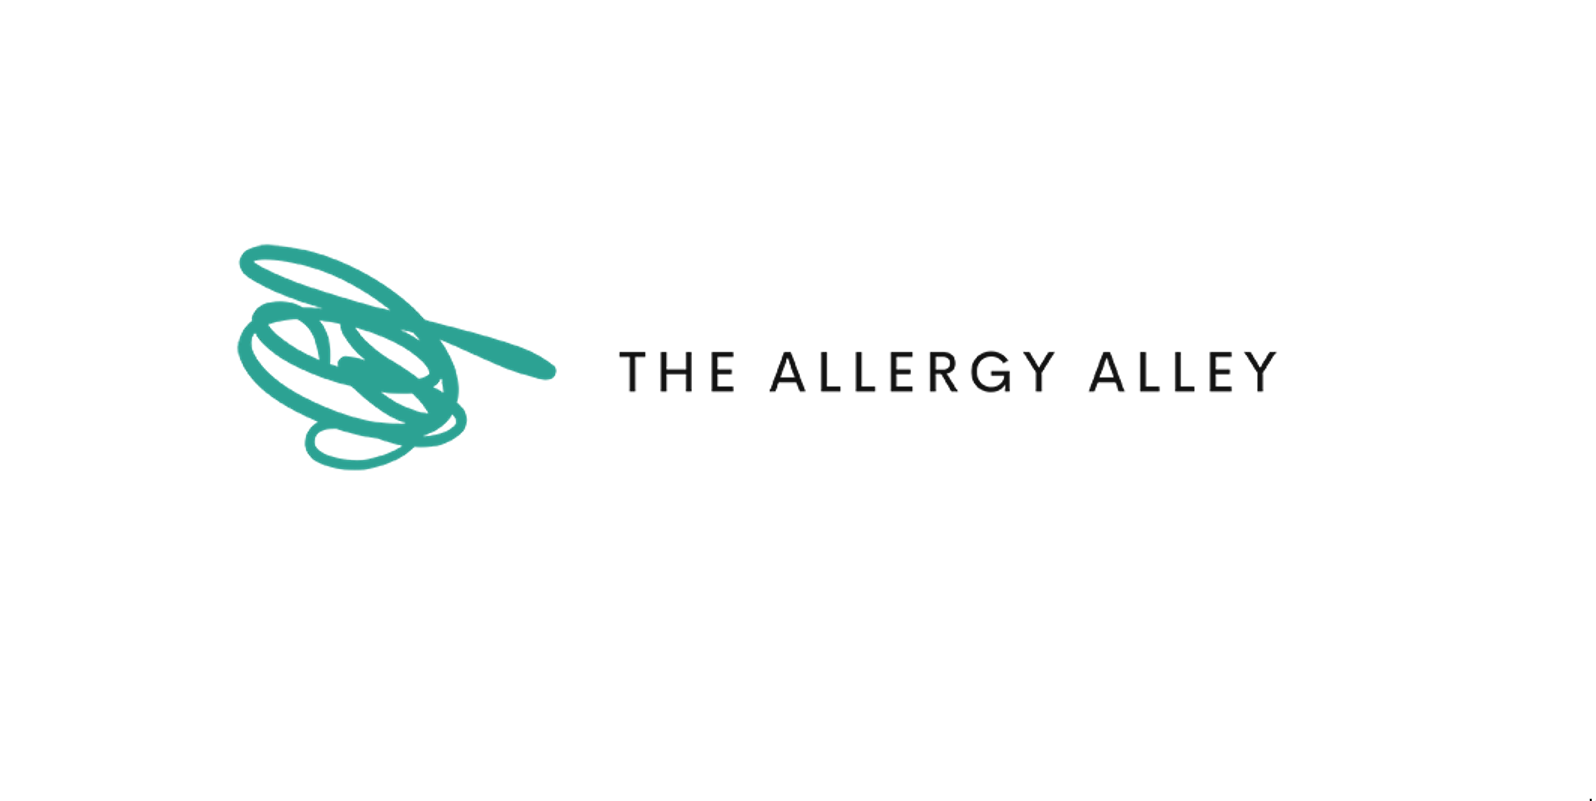 The Allergy Alley